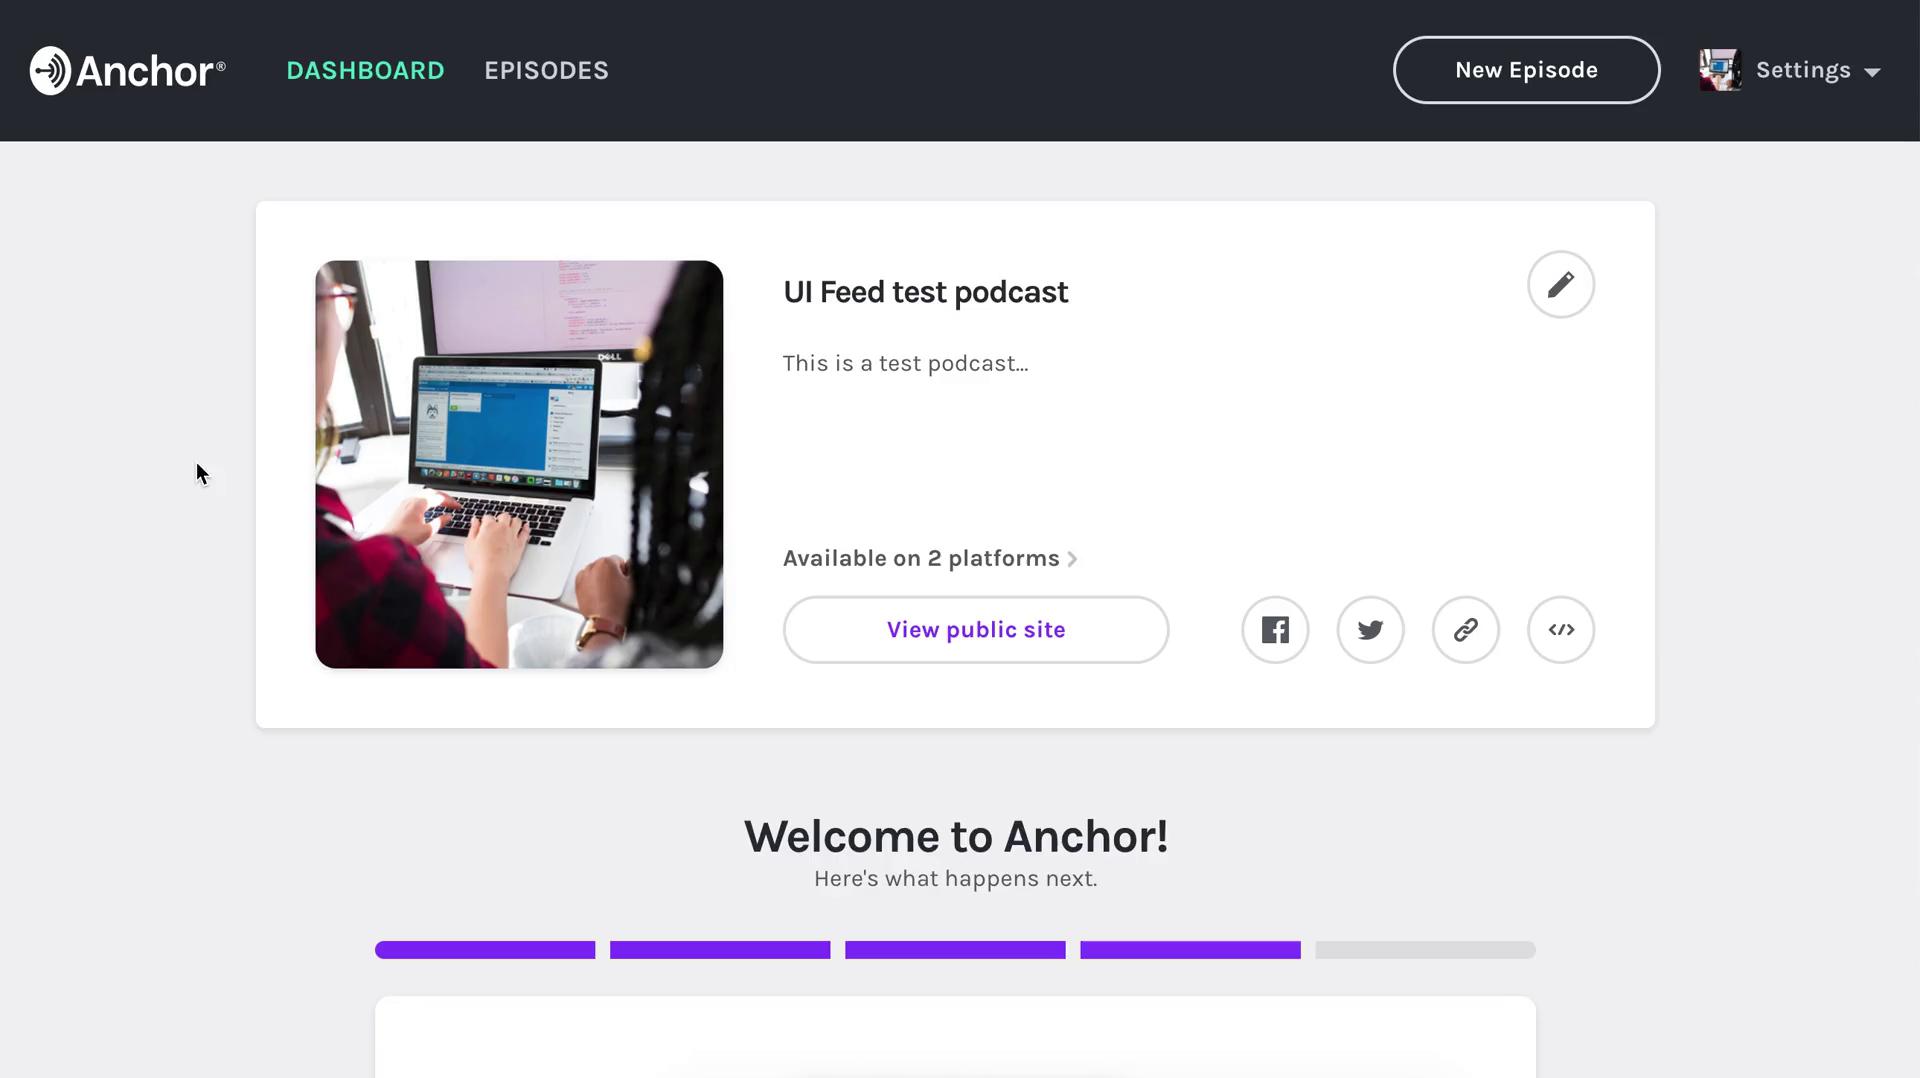 Screenshot of Dashboard on General browsing on Anchor user flow